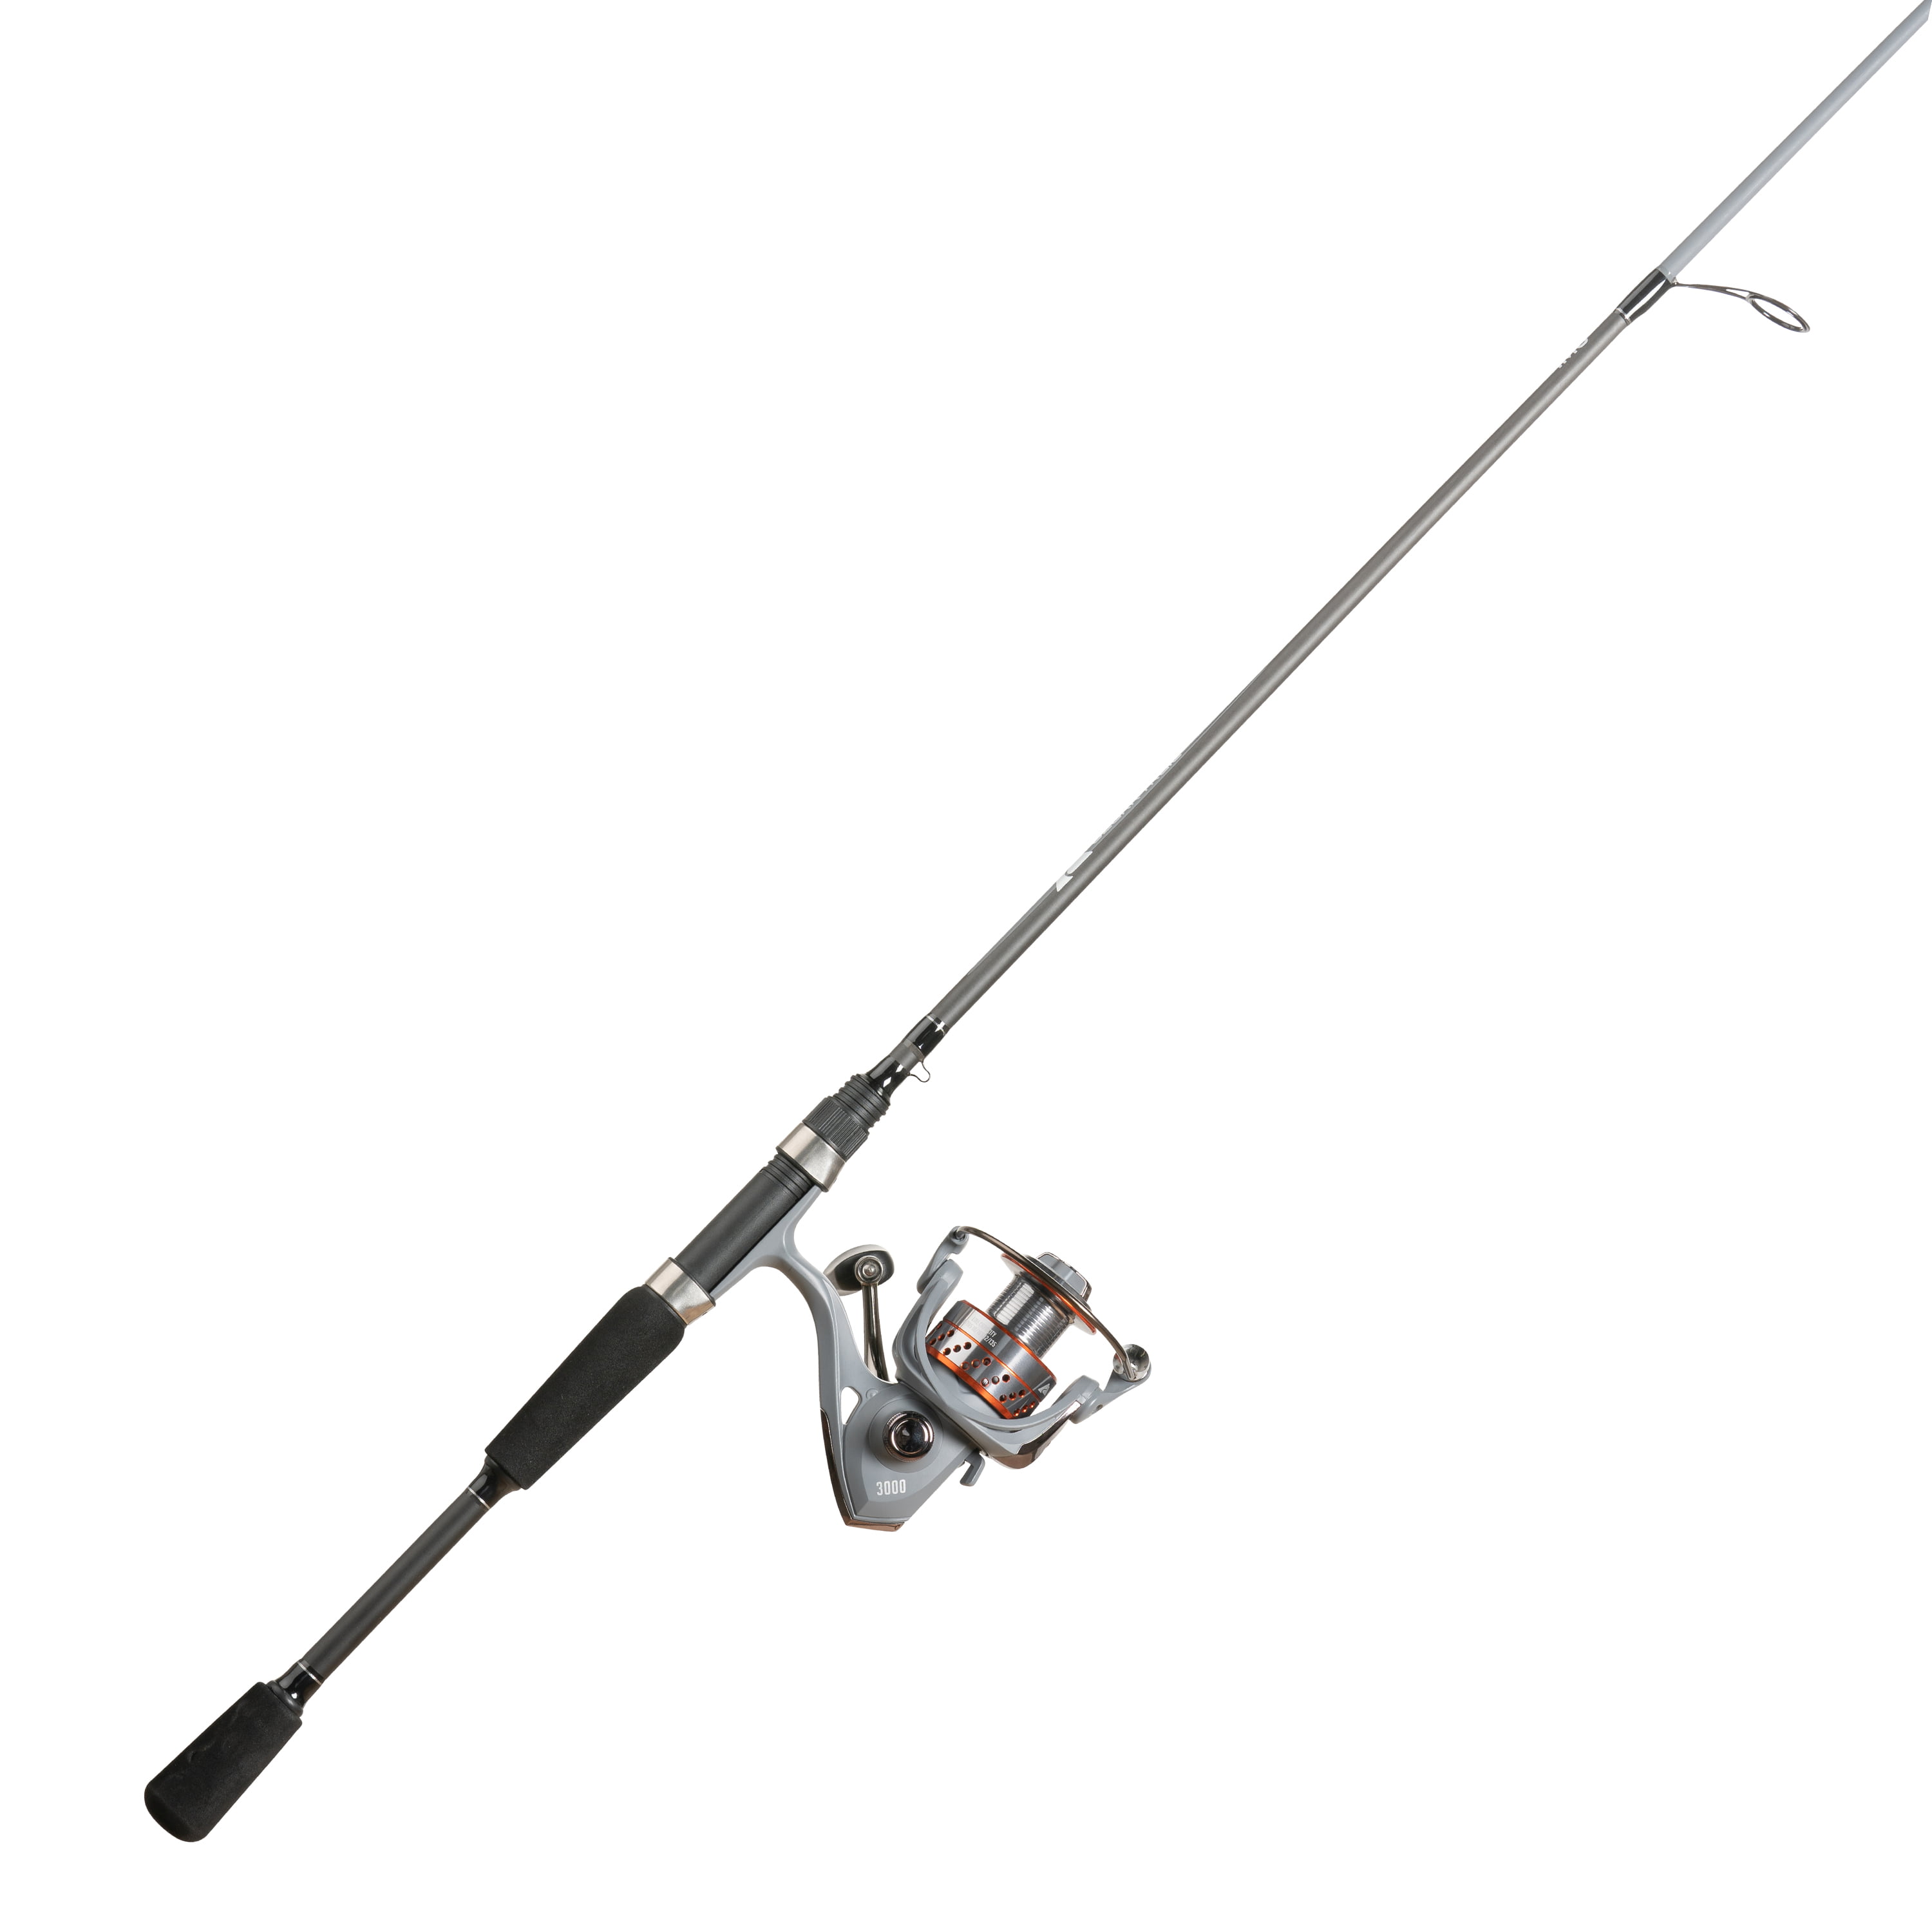 YMMV: Ozark Trail Fishing Rod and Reel Combo 6'6" $5 at Walmart In-Store